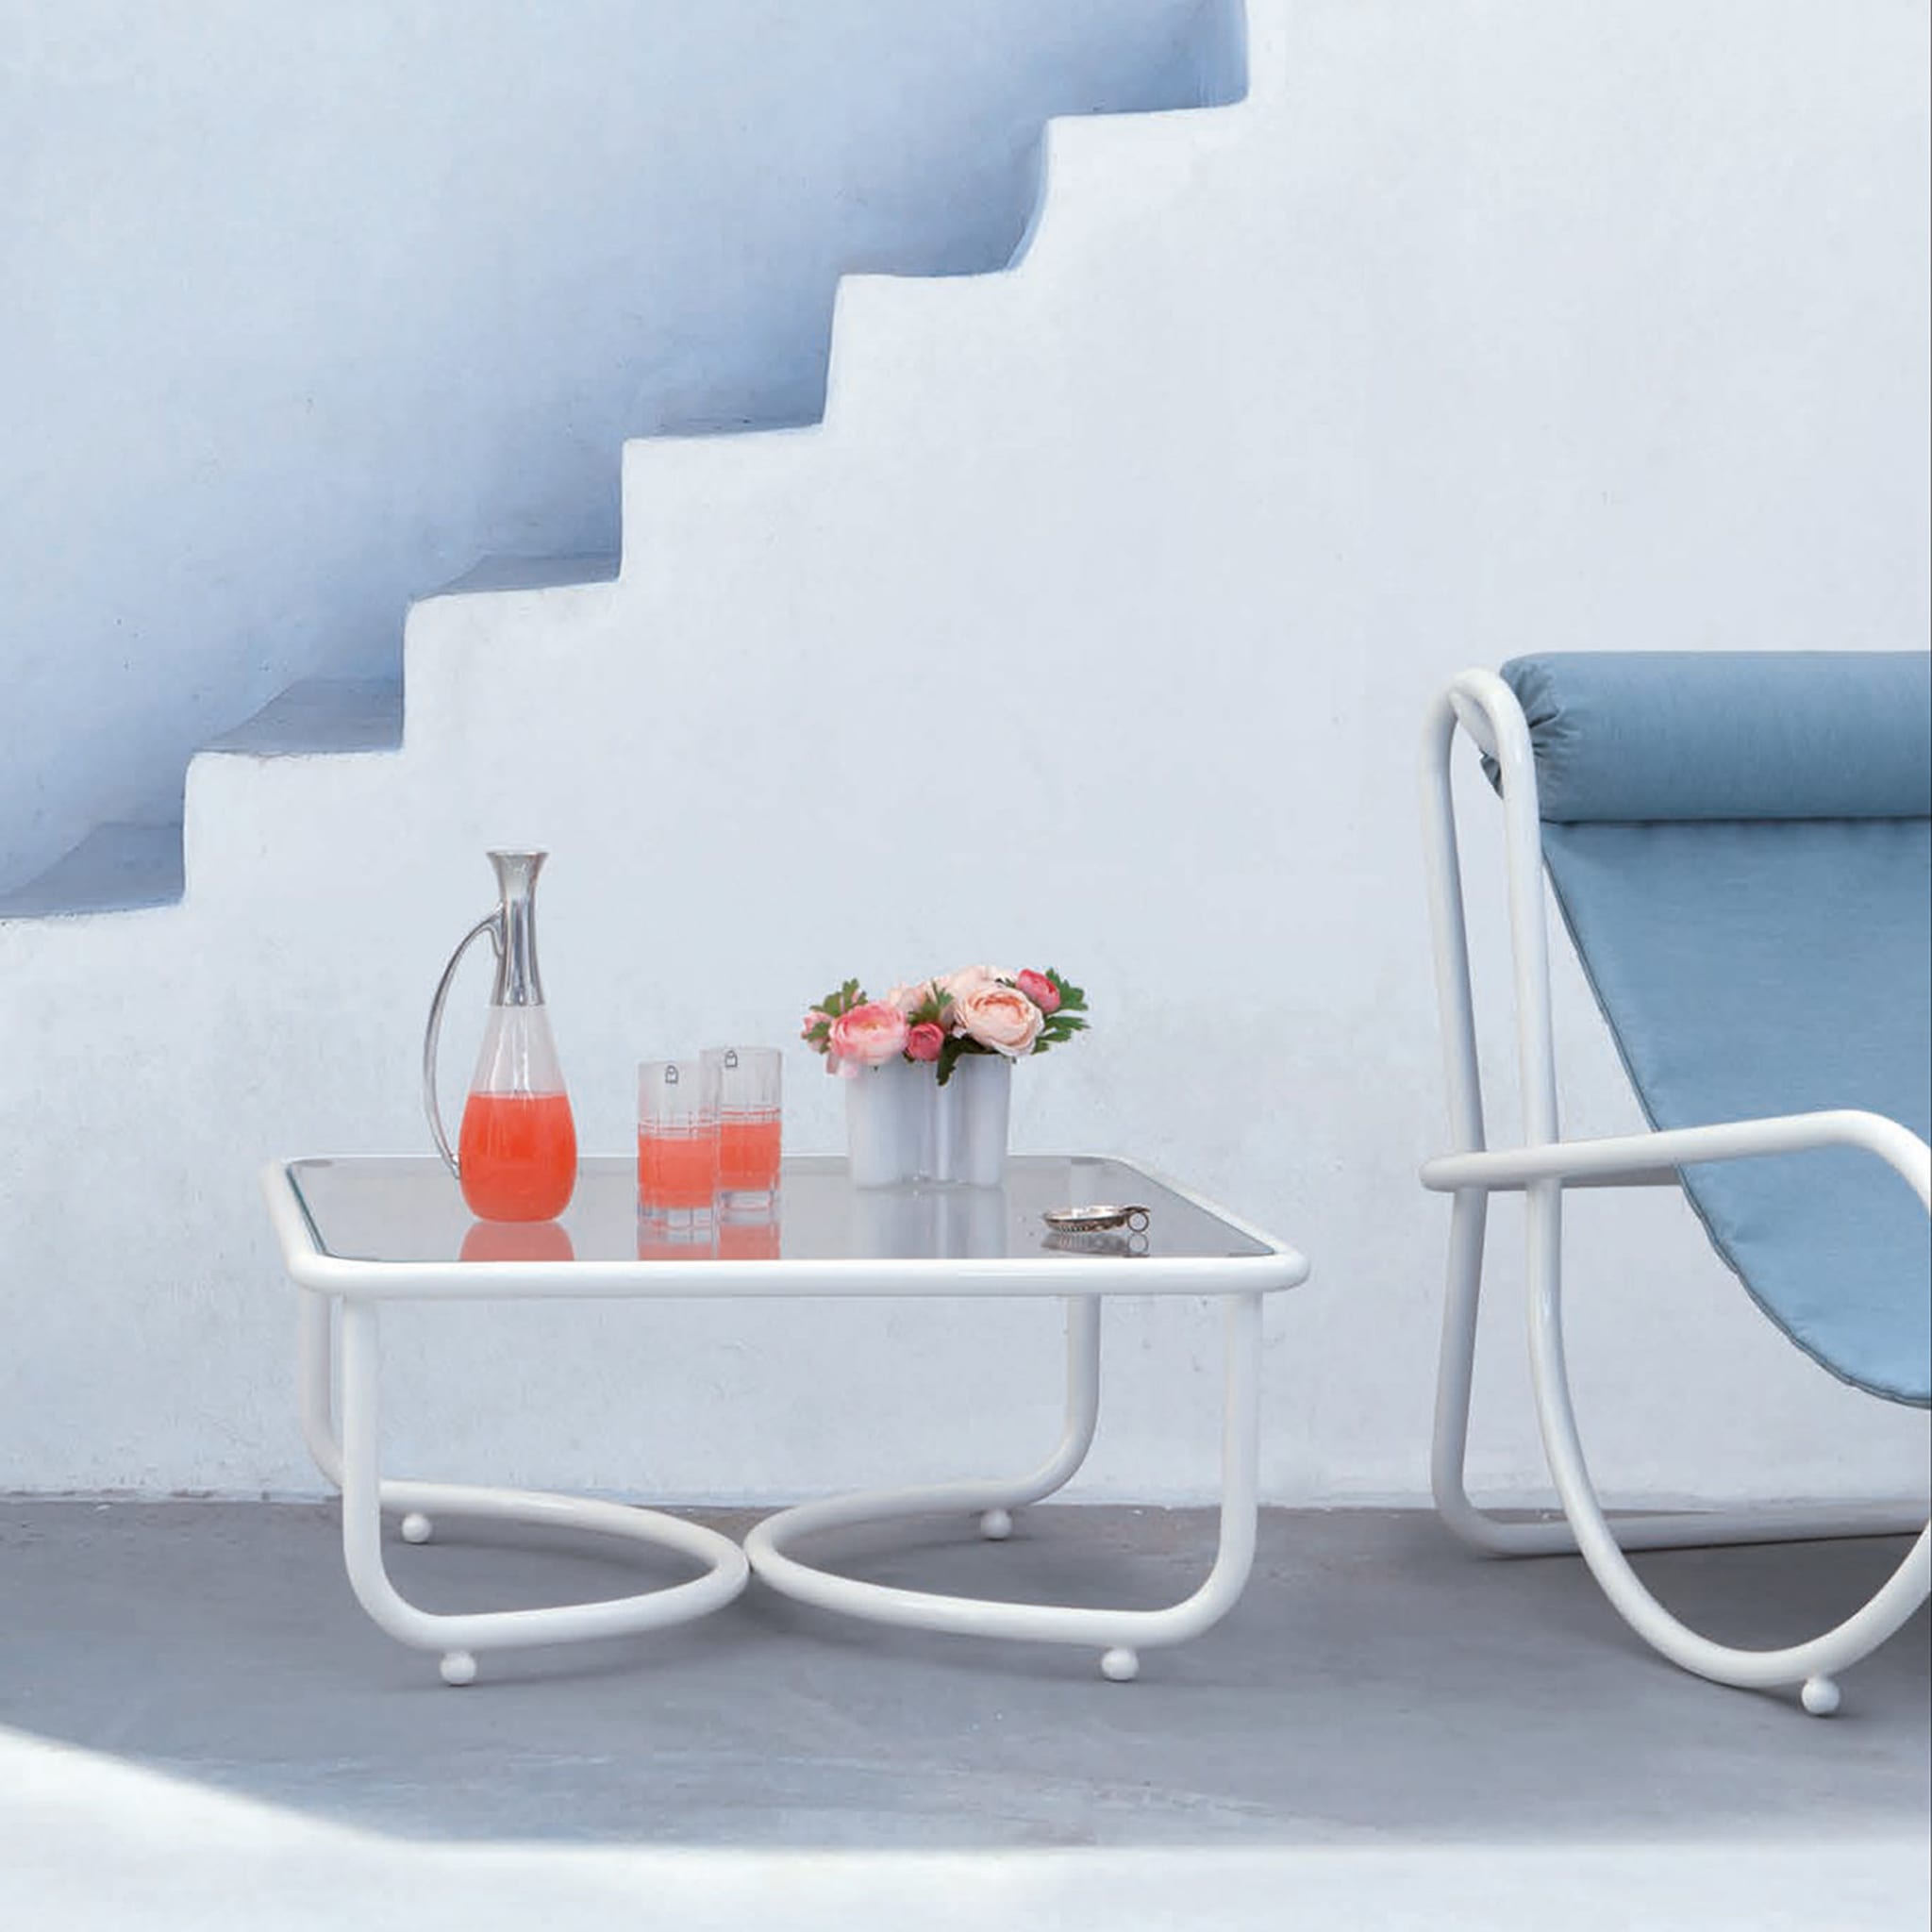 Locus Solus White Low Table by Gae Aulenti - Alternative view 1